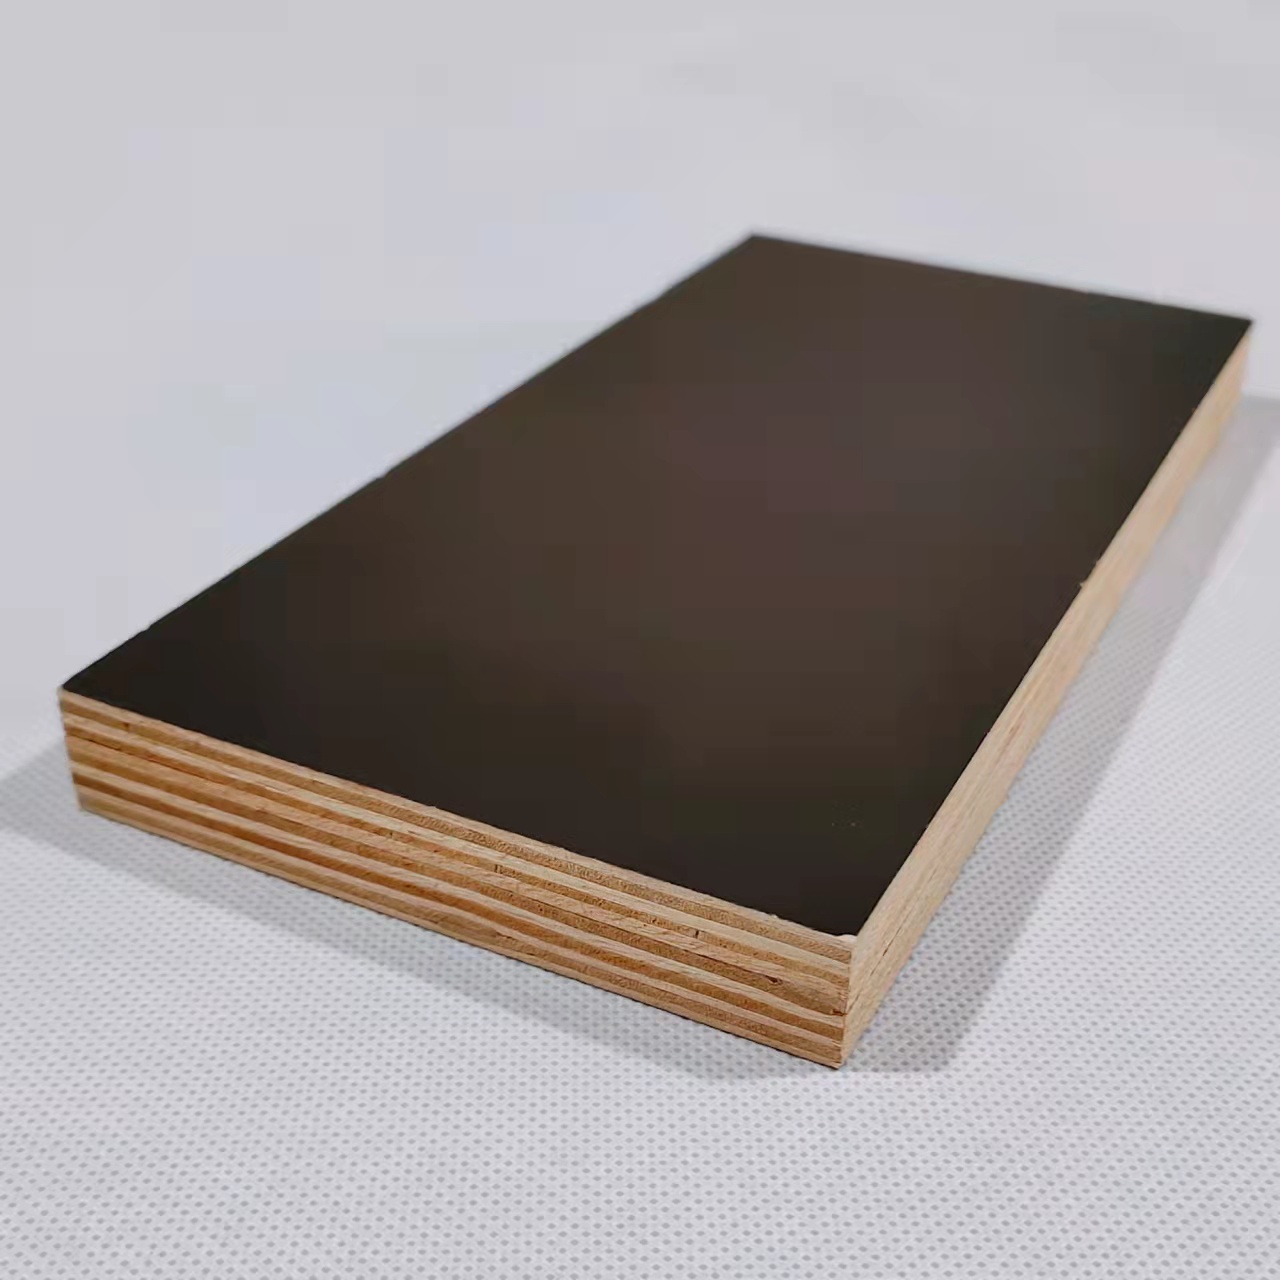 18mm Film Faced Plywood Film Faced Plywood Standard Featured Image